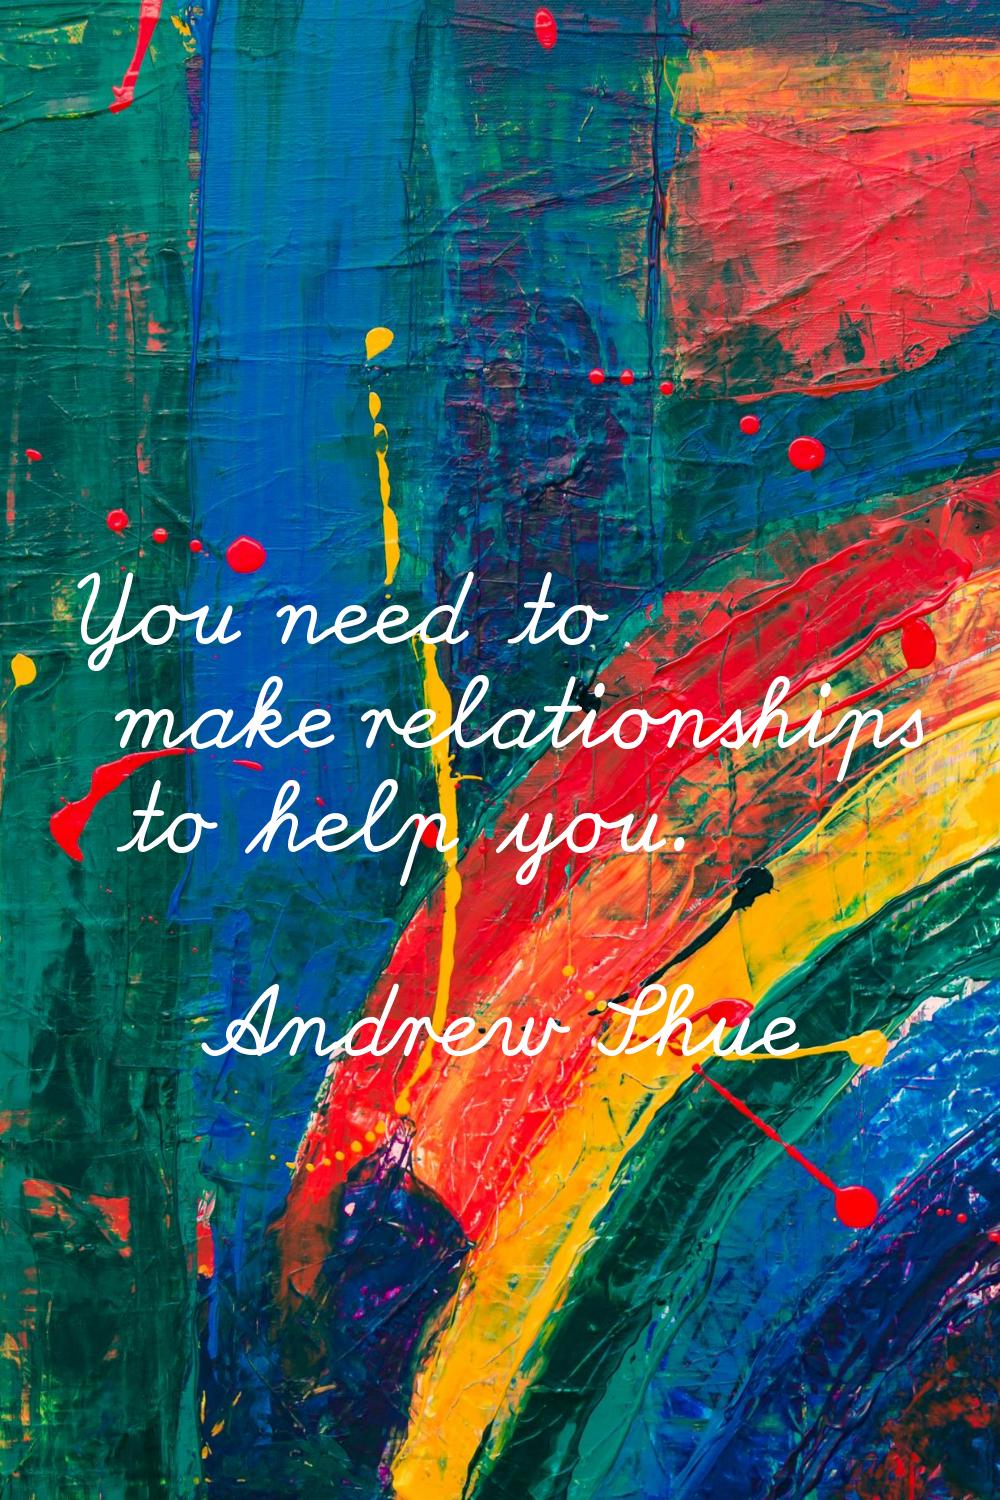 You need to make relationships to help you.